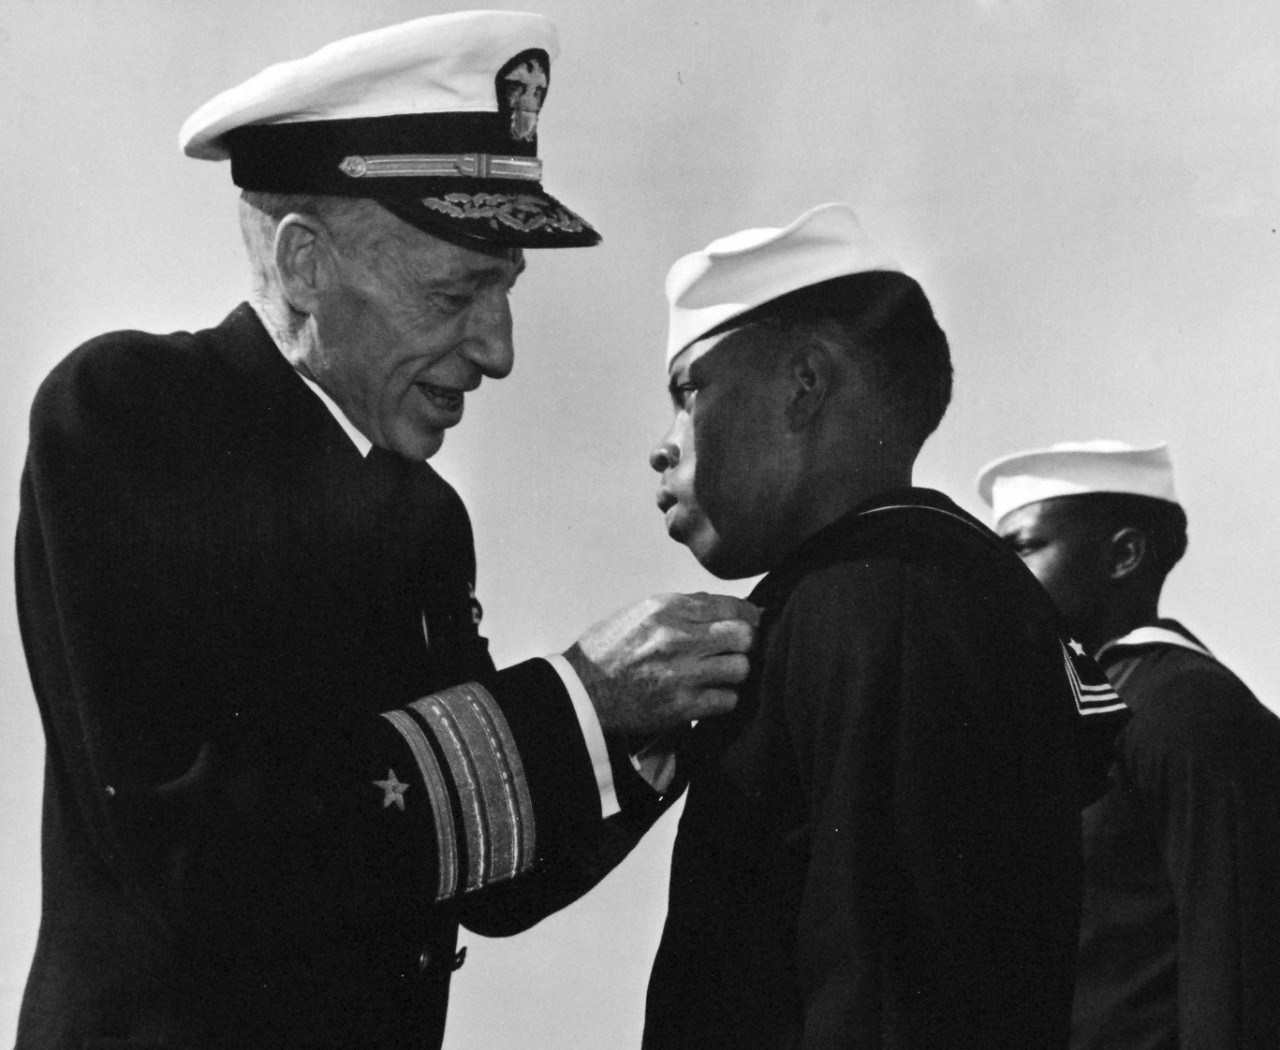 80-G-47284:  Seaman Second Class Effus S. Allen, USNR, 1944.  Rear Admiral Carleton H. Wright presenting the Navy and Marine Corps Medal to Seaman Second Class Effus S. Allen, USNR.   Received the medal for risking his life to bring flames under control during the Port Chicago Magazine, California, explosion and fire.    Photograph filed December 9, 1944. Official U.S. Navy photograph, now in the collections of the National Archives.   